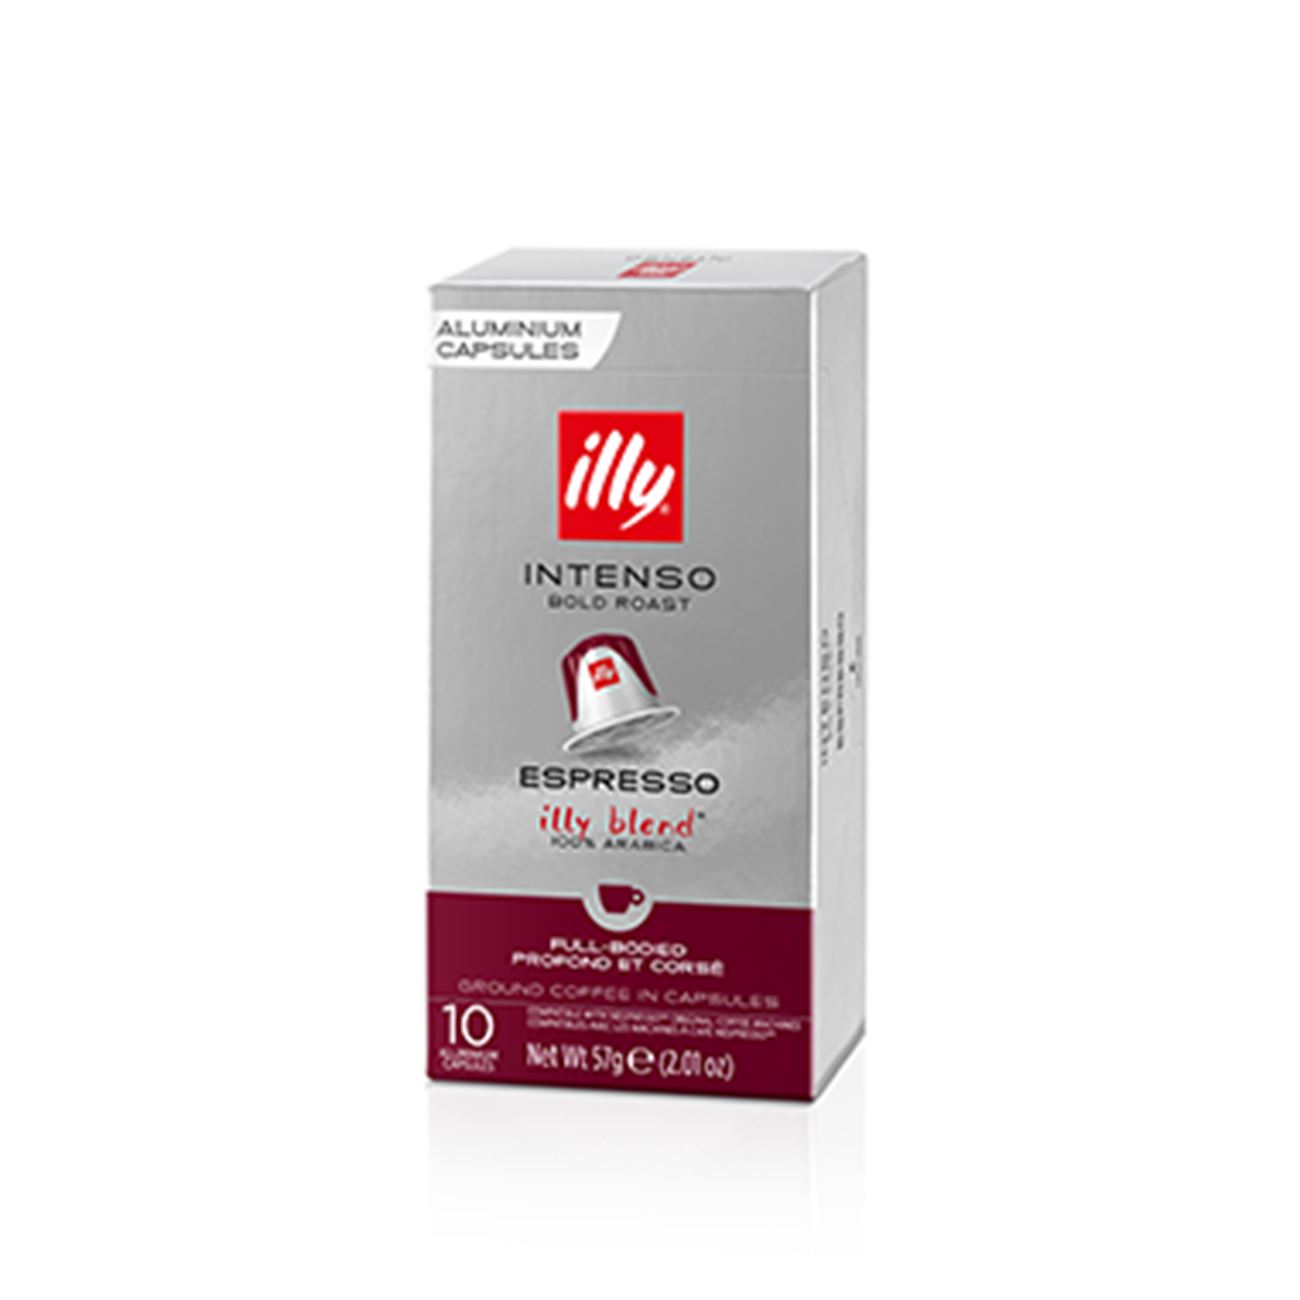 illy INTENSO 10 COMPATIBLE ΚΑΨΟΥΛΕΣ